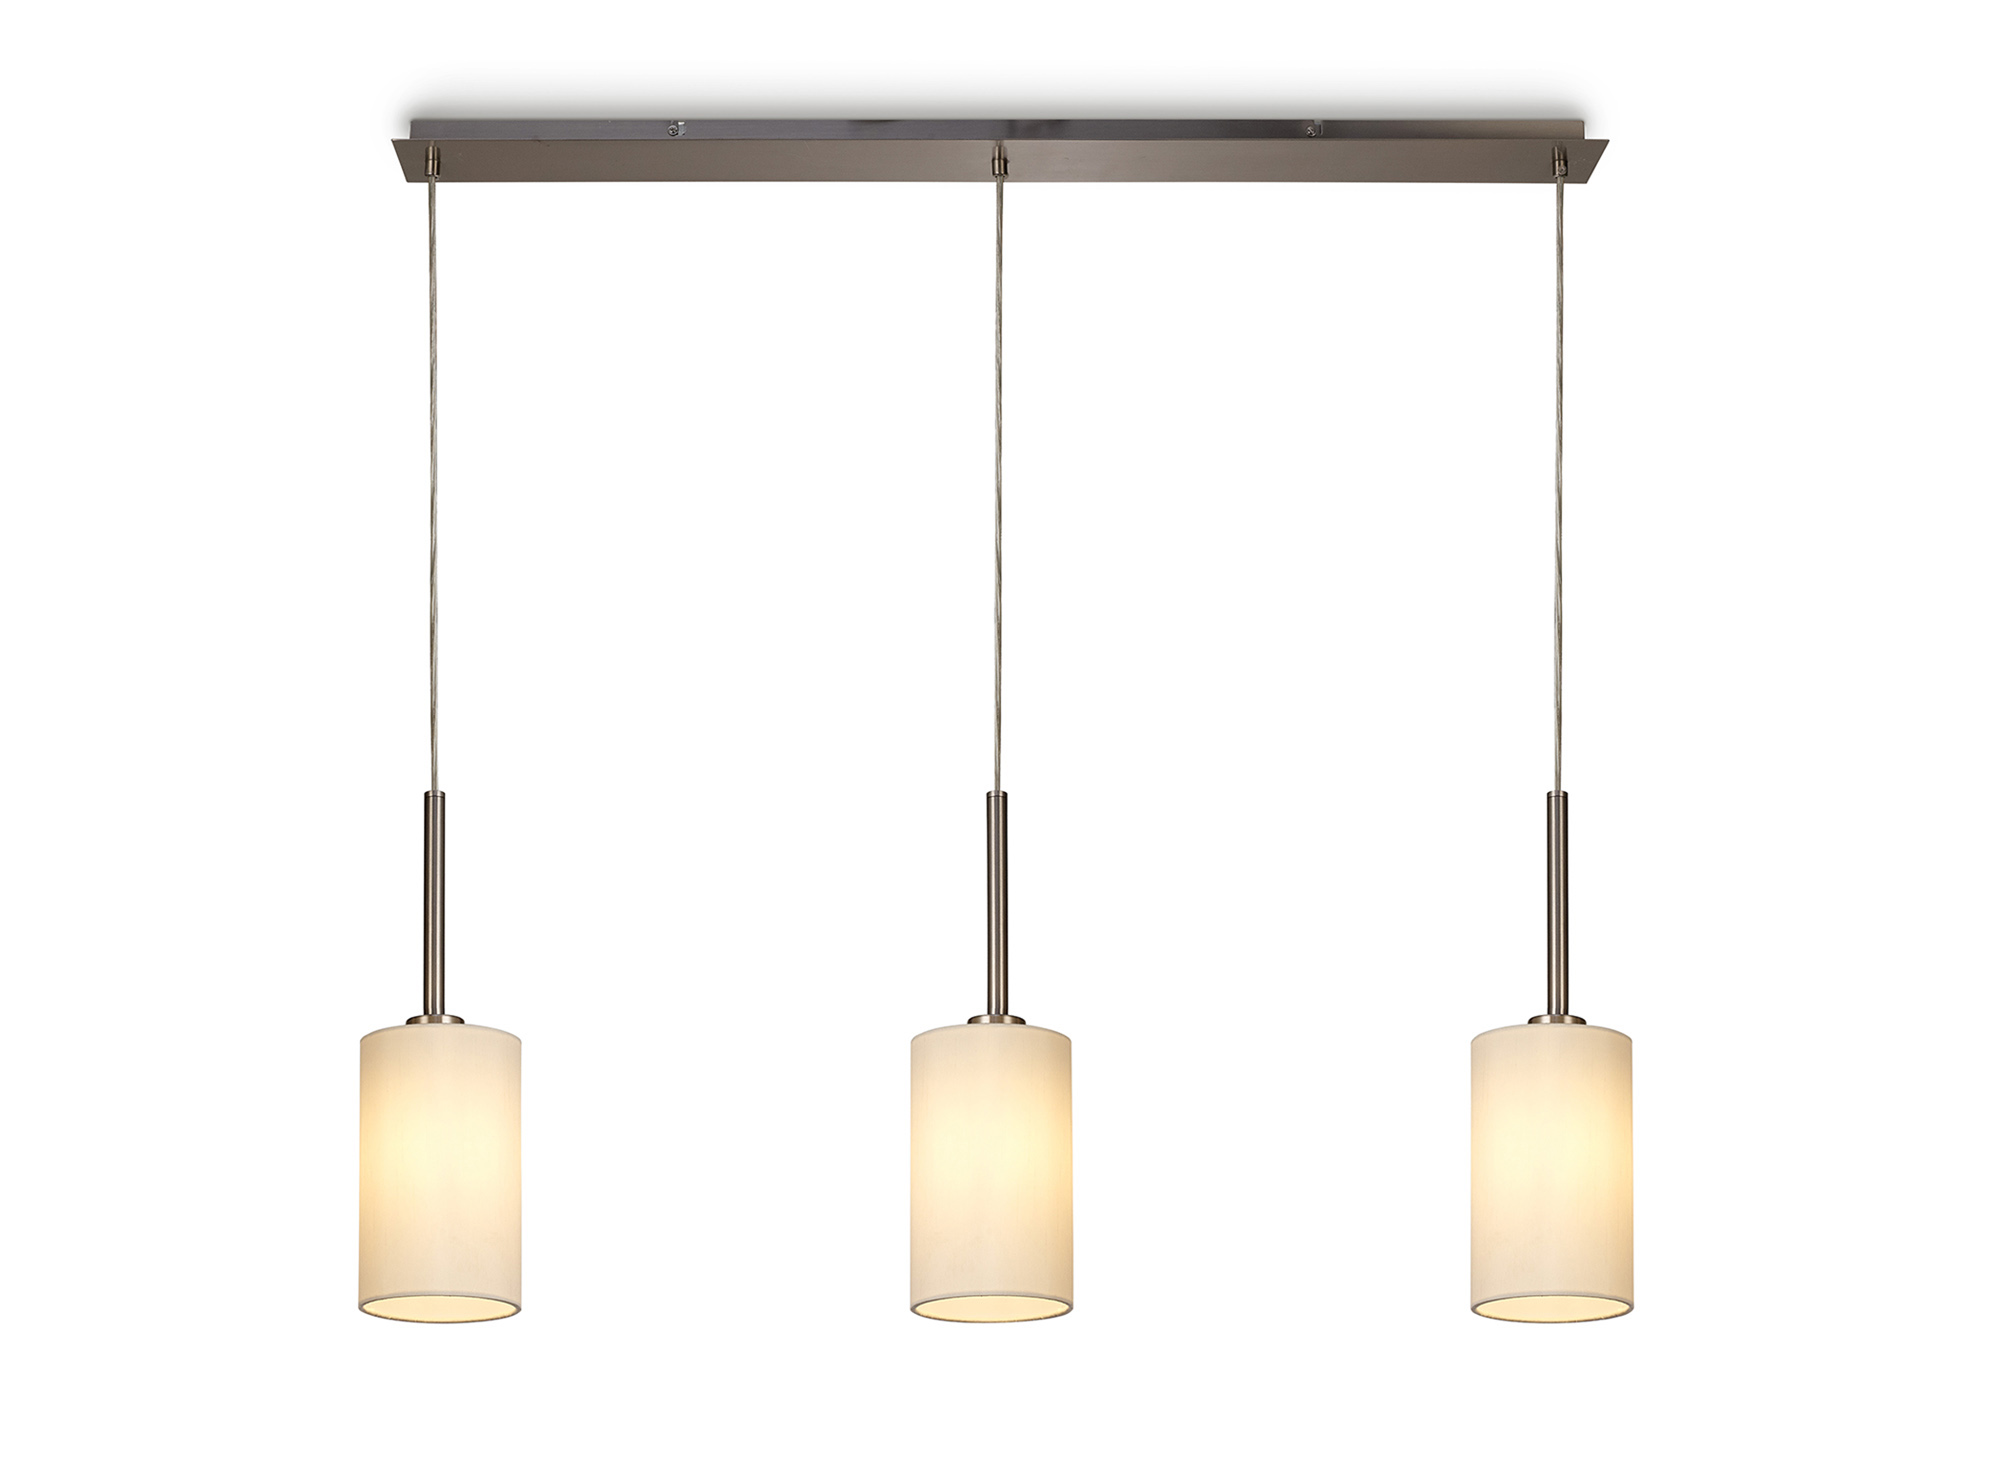 Baymont SN IV Ceiling Lights Deco Linear Fittings